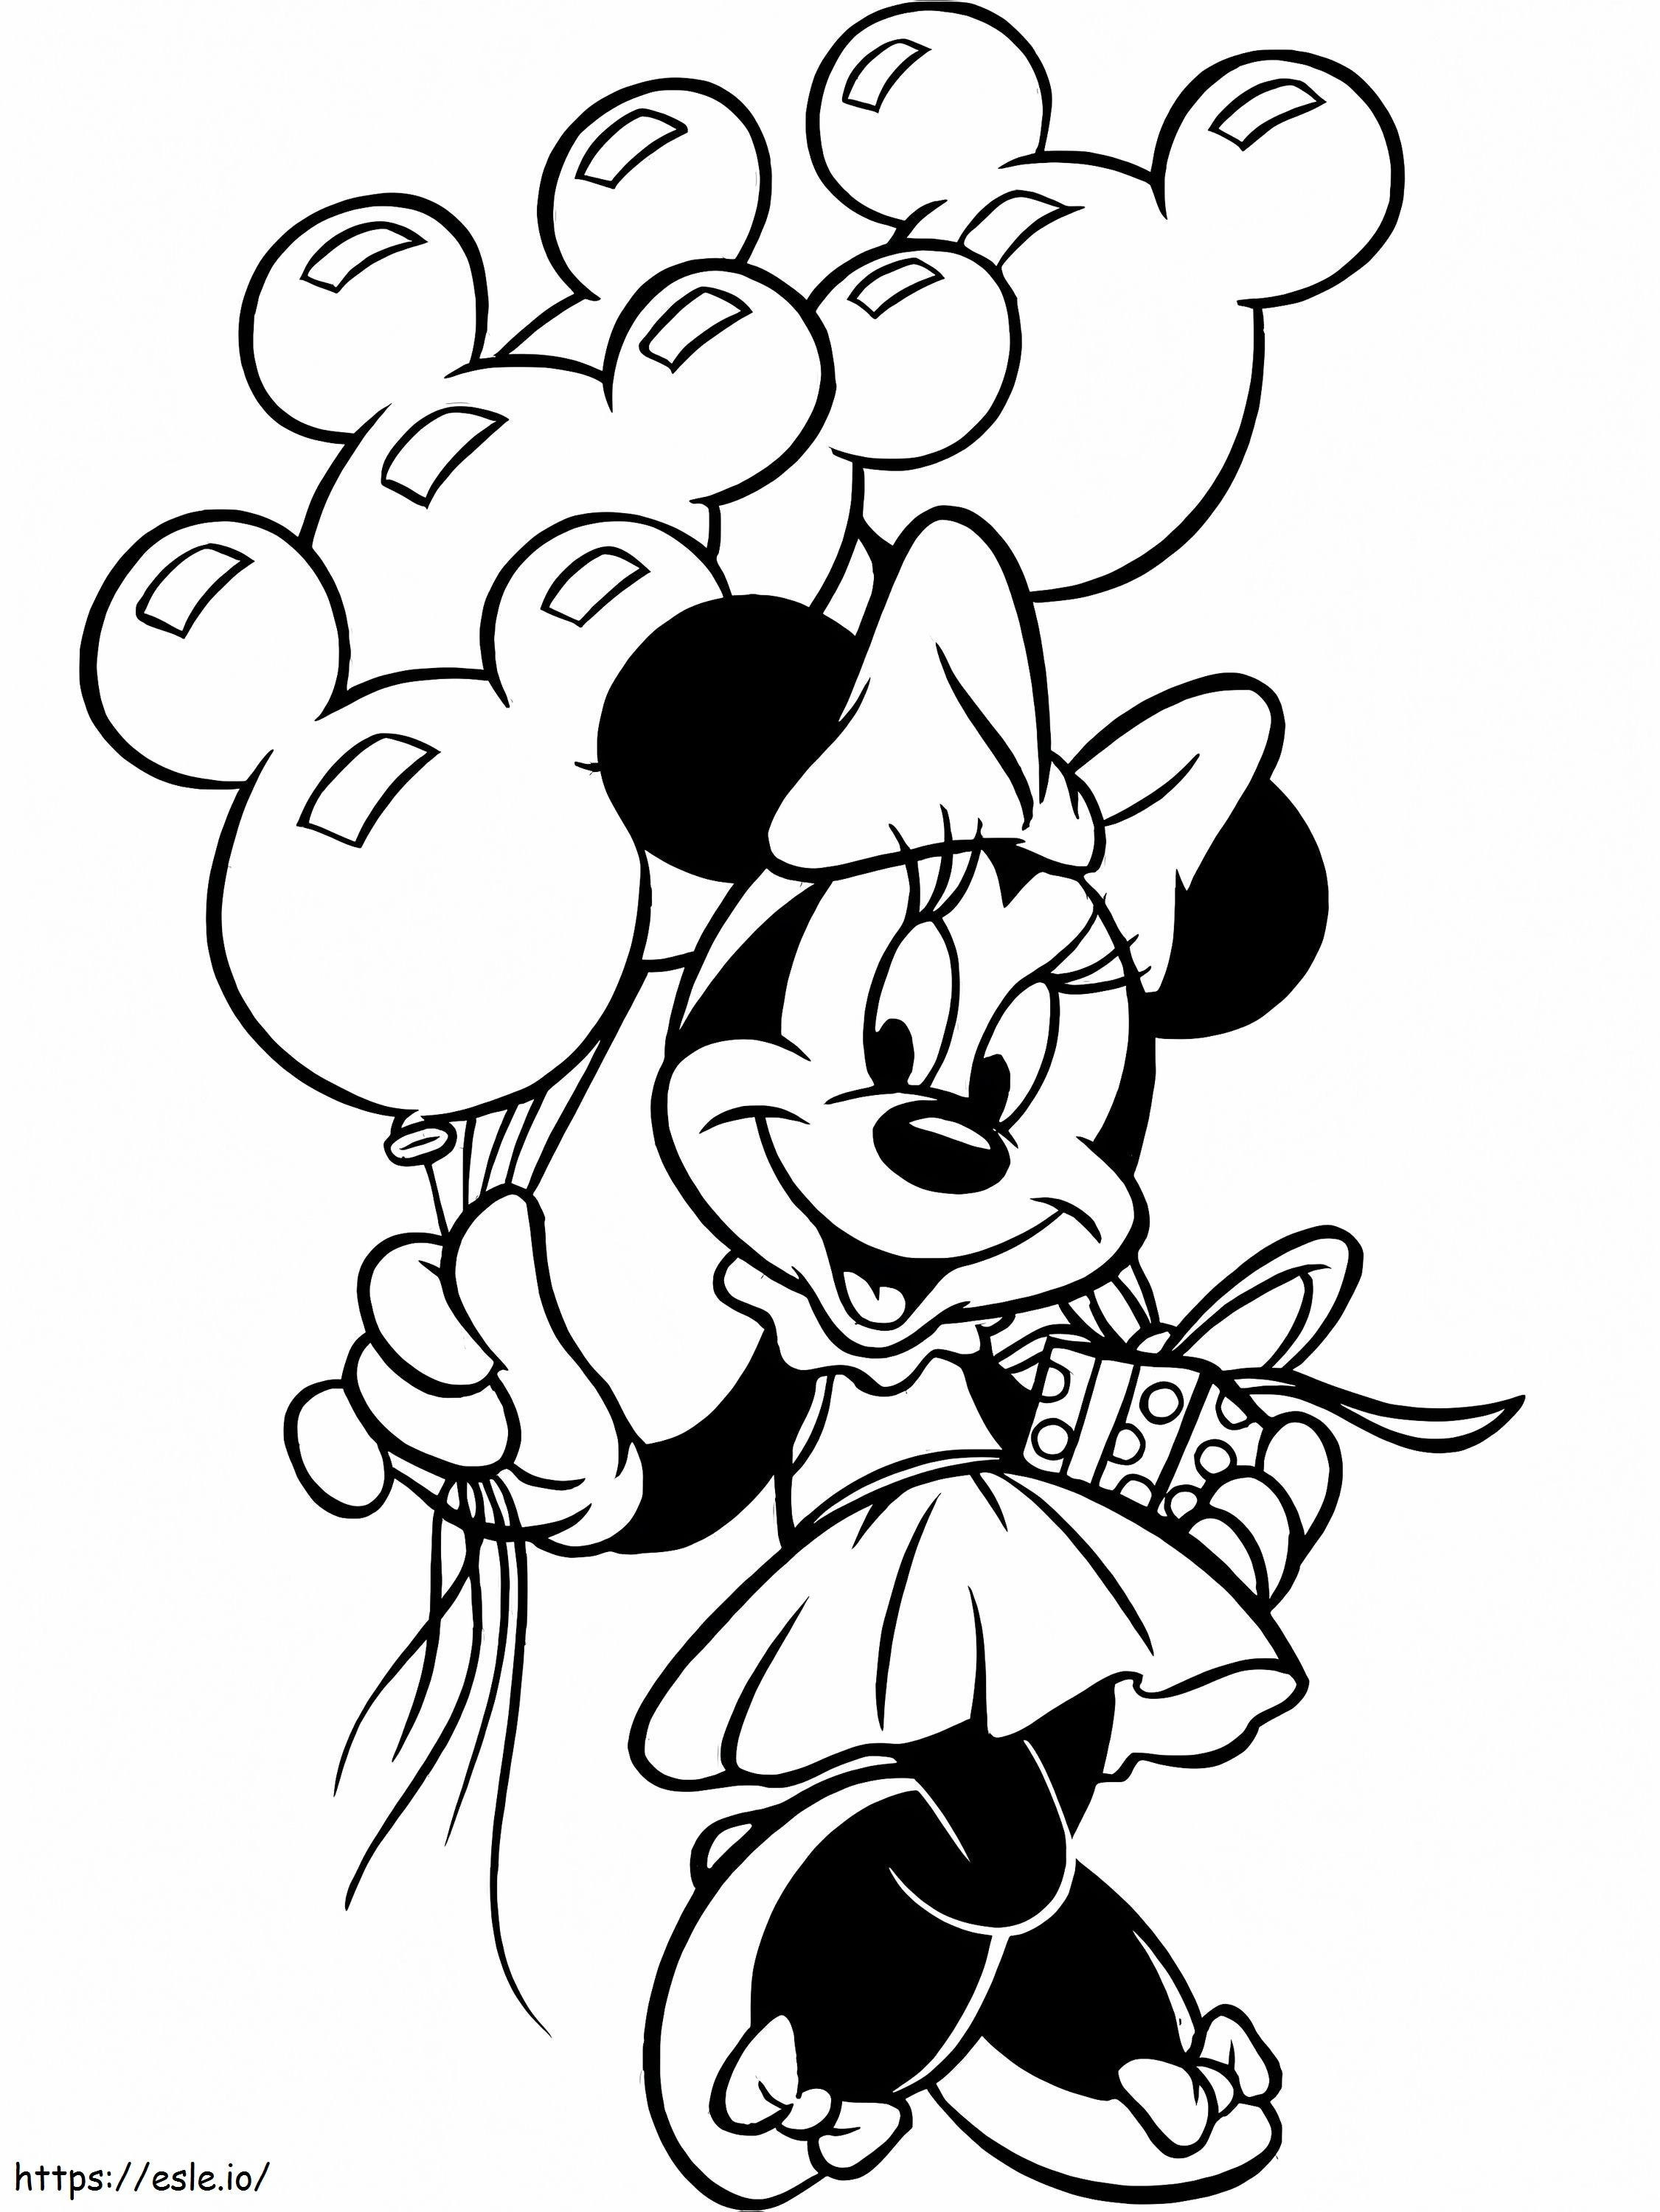 Minnie Mouse And Balloons coloring page